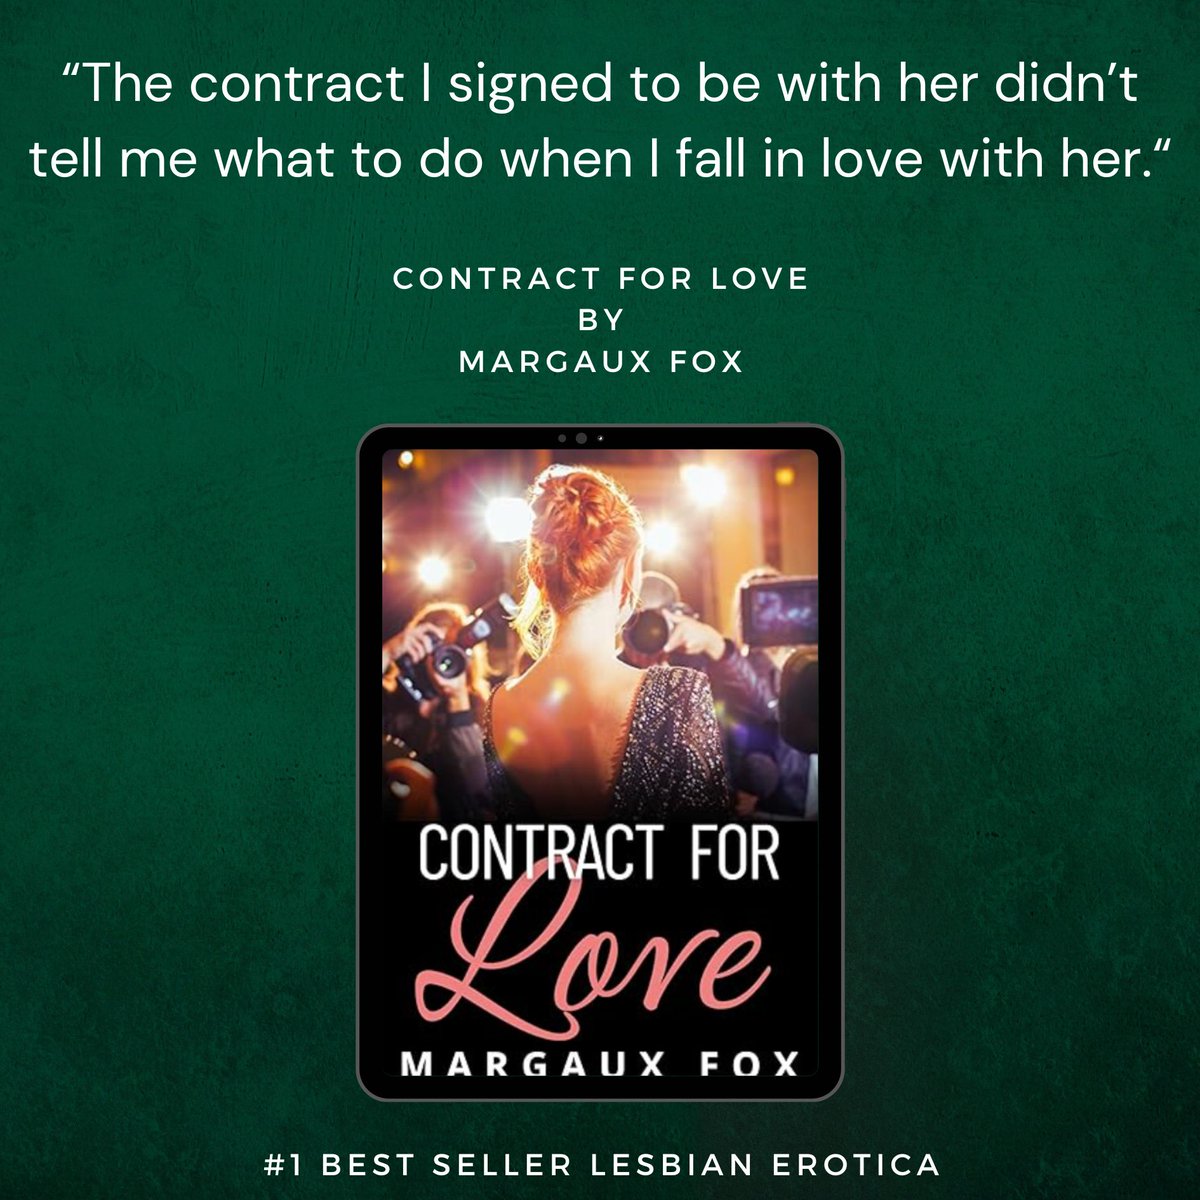 Out Now 💕 Contract for Love. Introducing a super steamy romance between a struggling track athlete and a Hollywood star. But when a secret contract comes into play, things get even more complicated. Will love win the end? 🖤 read it here mybook.to/IT1 #lesfic